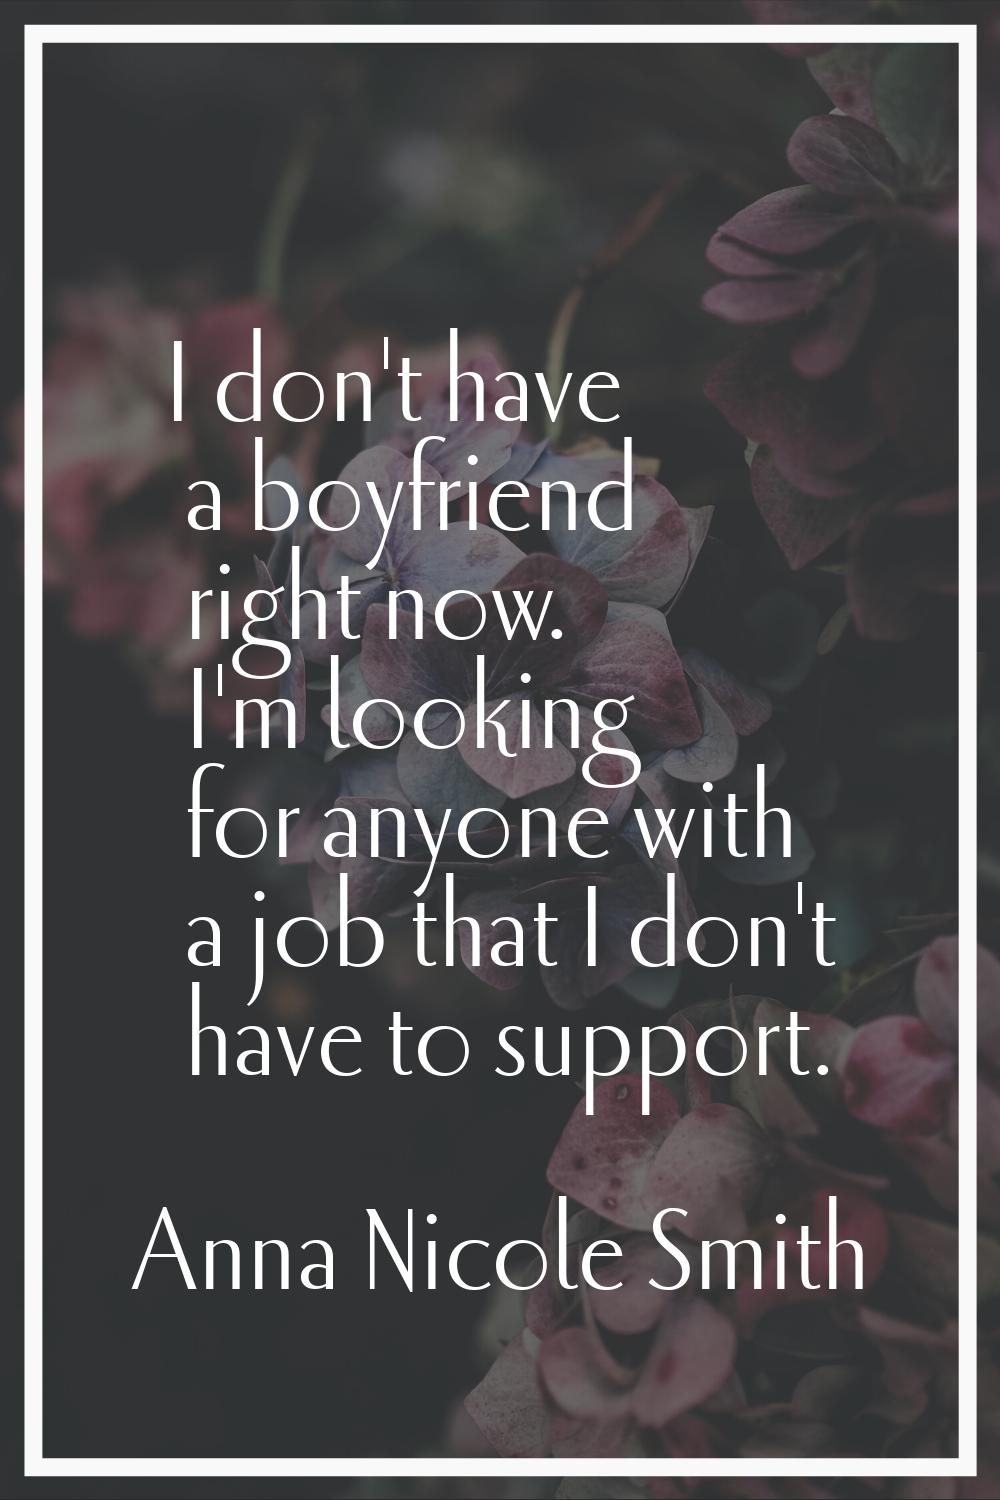 I don't have a boyfriend right now. I'm looking for anyone with a job that I don't have to support.